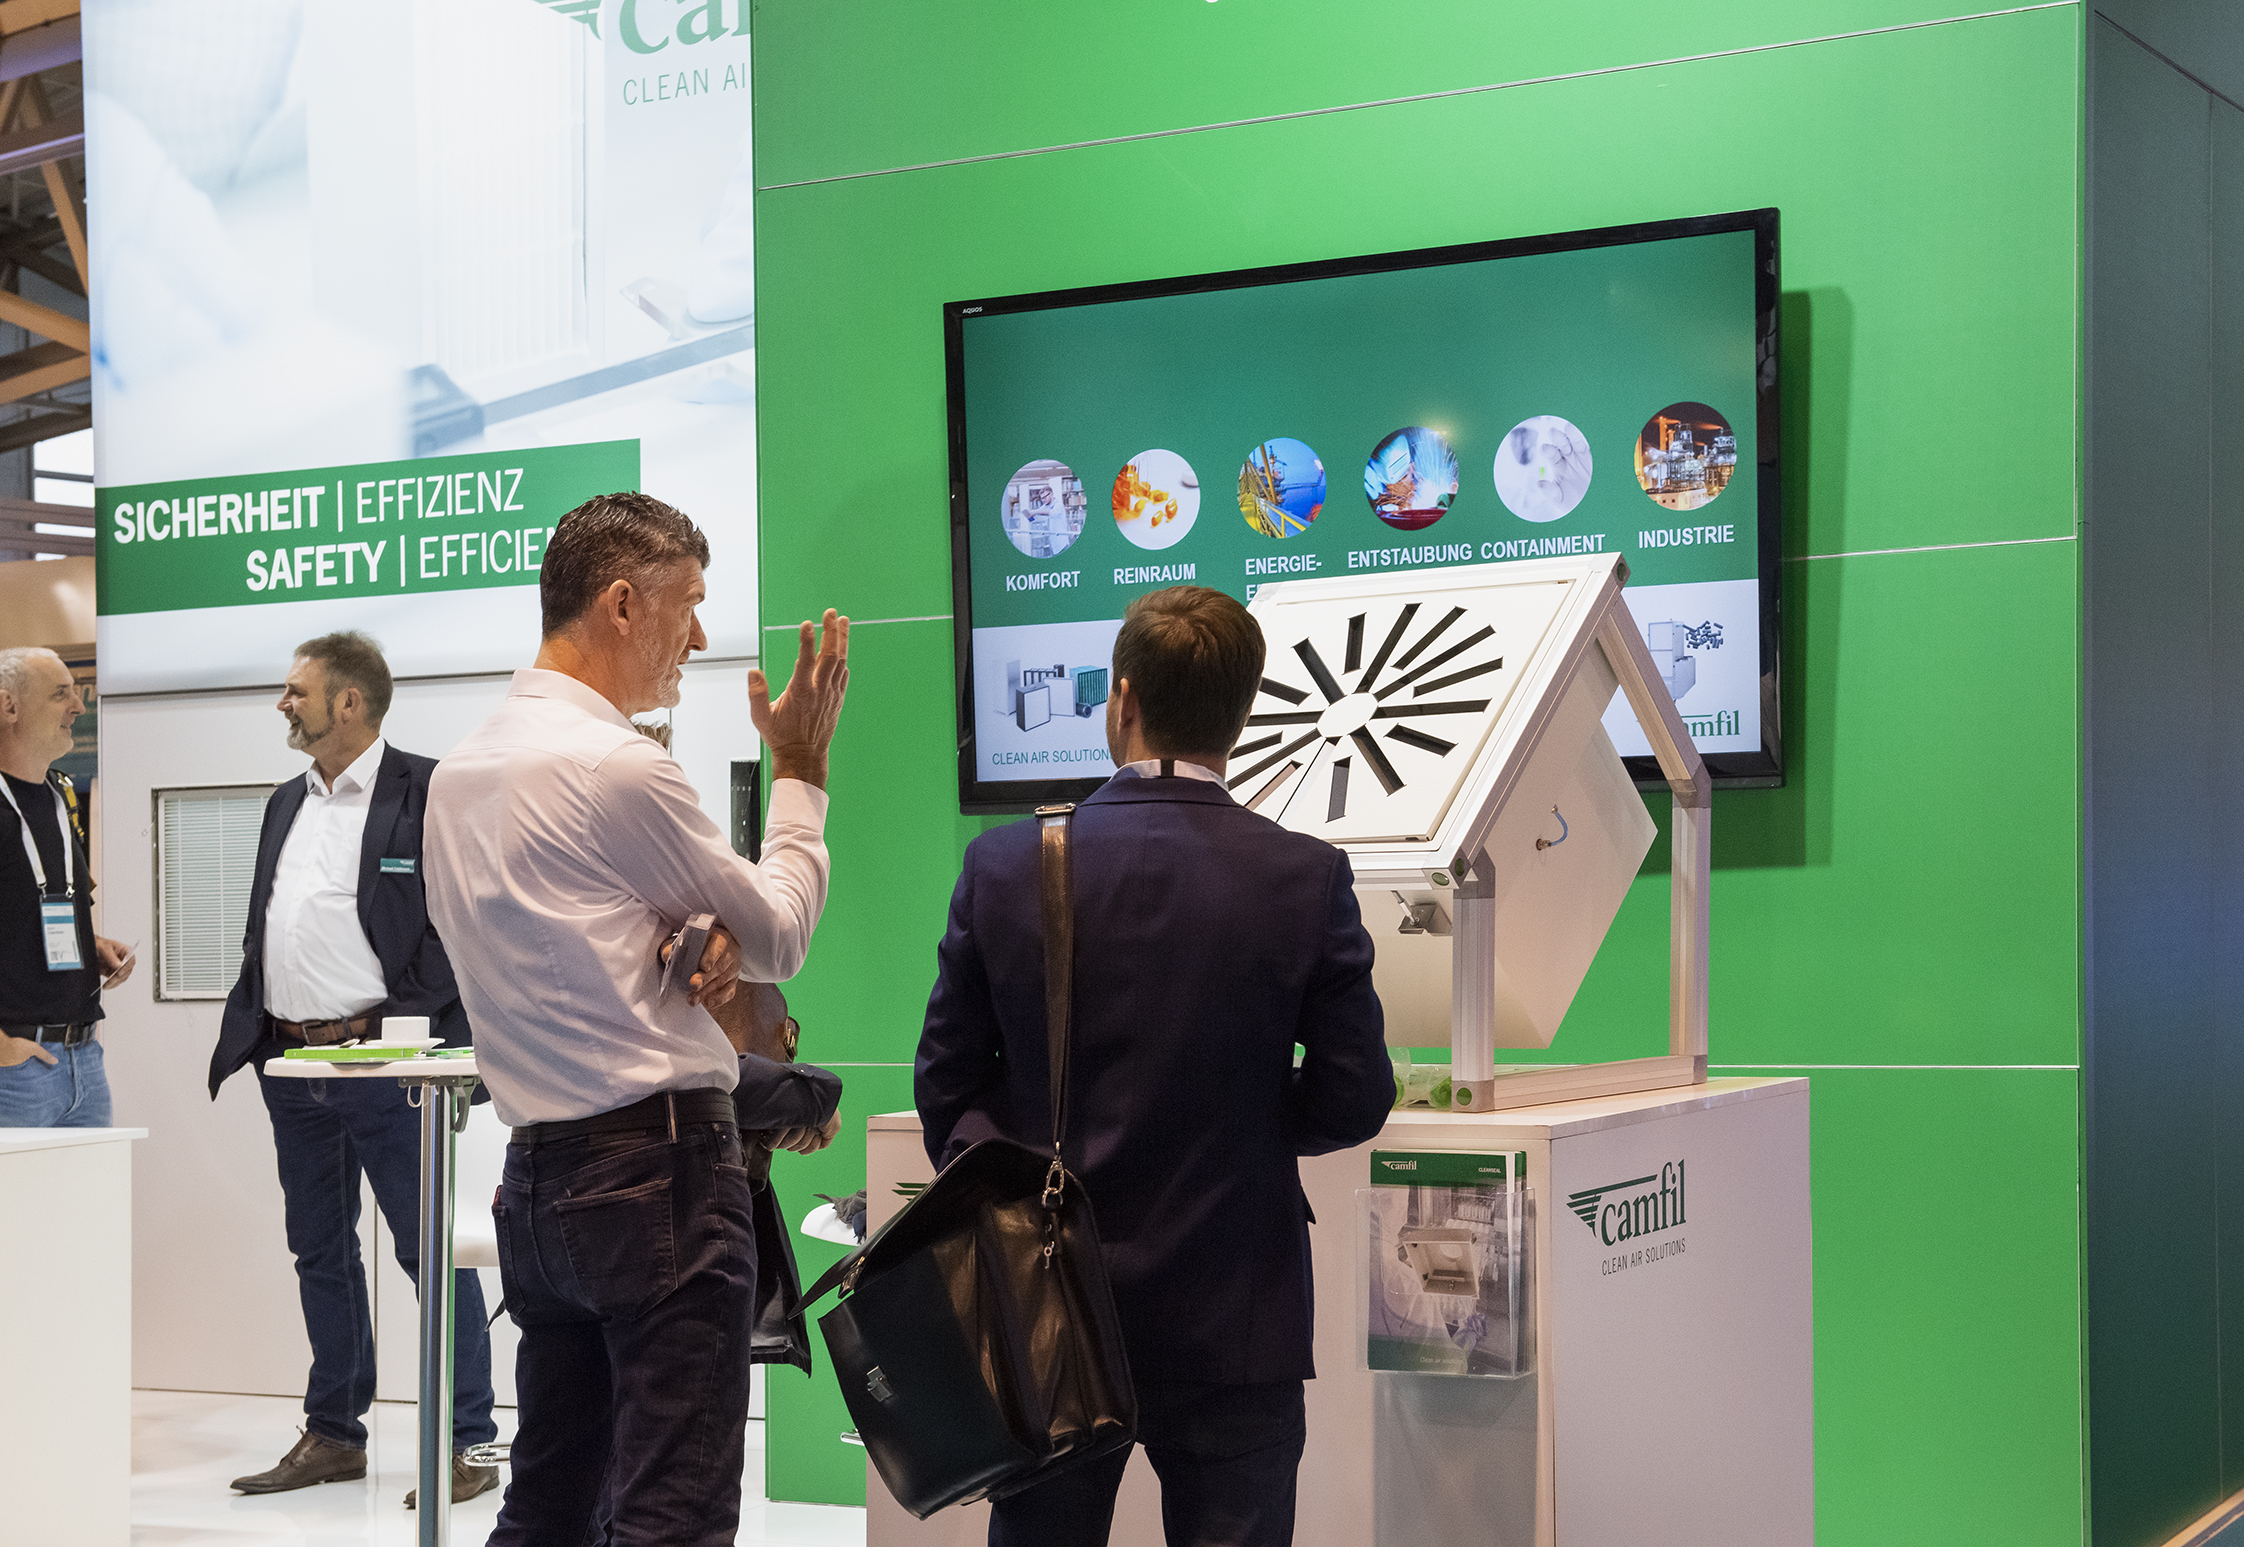 Energy efficiency is high on the agenda at Cleanzone. Source: Messe Frankfurt/Petra Welzel